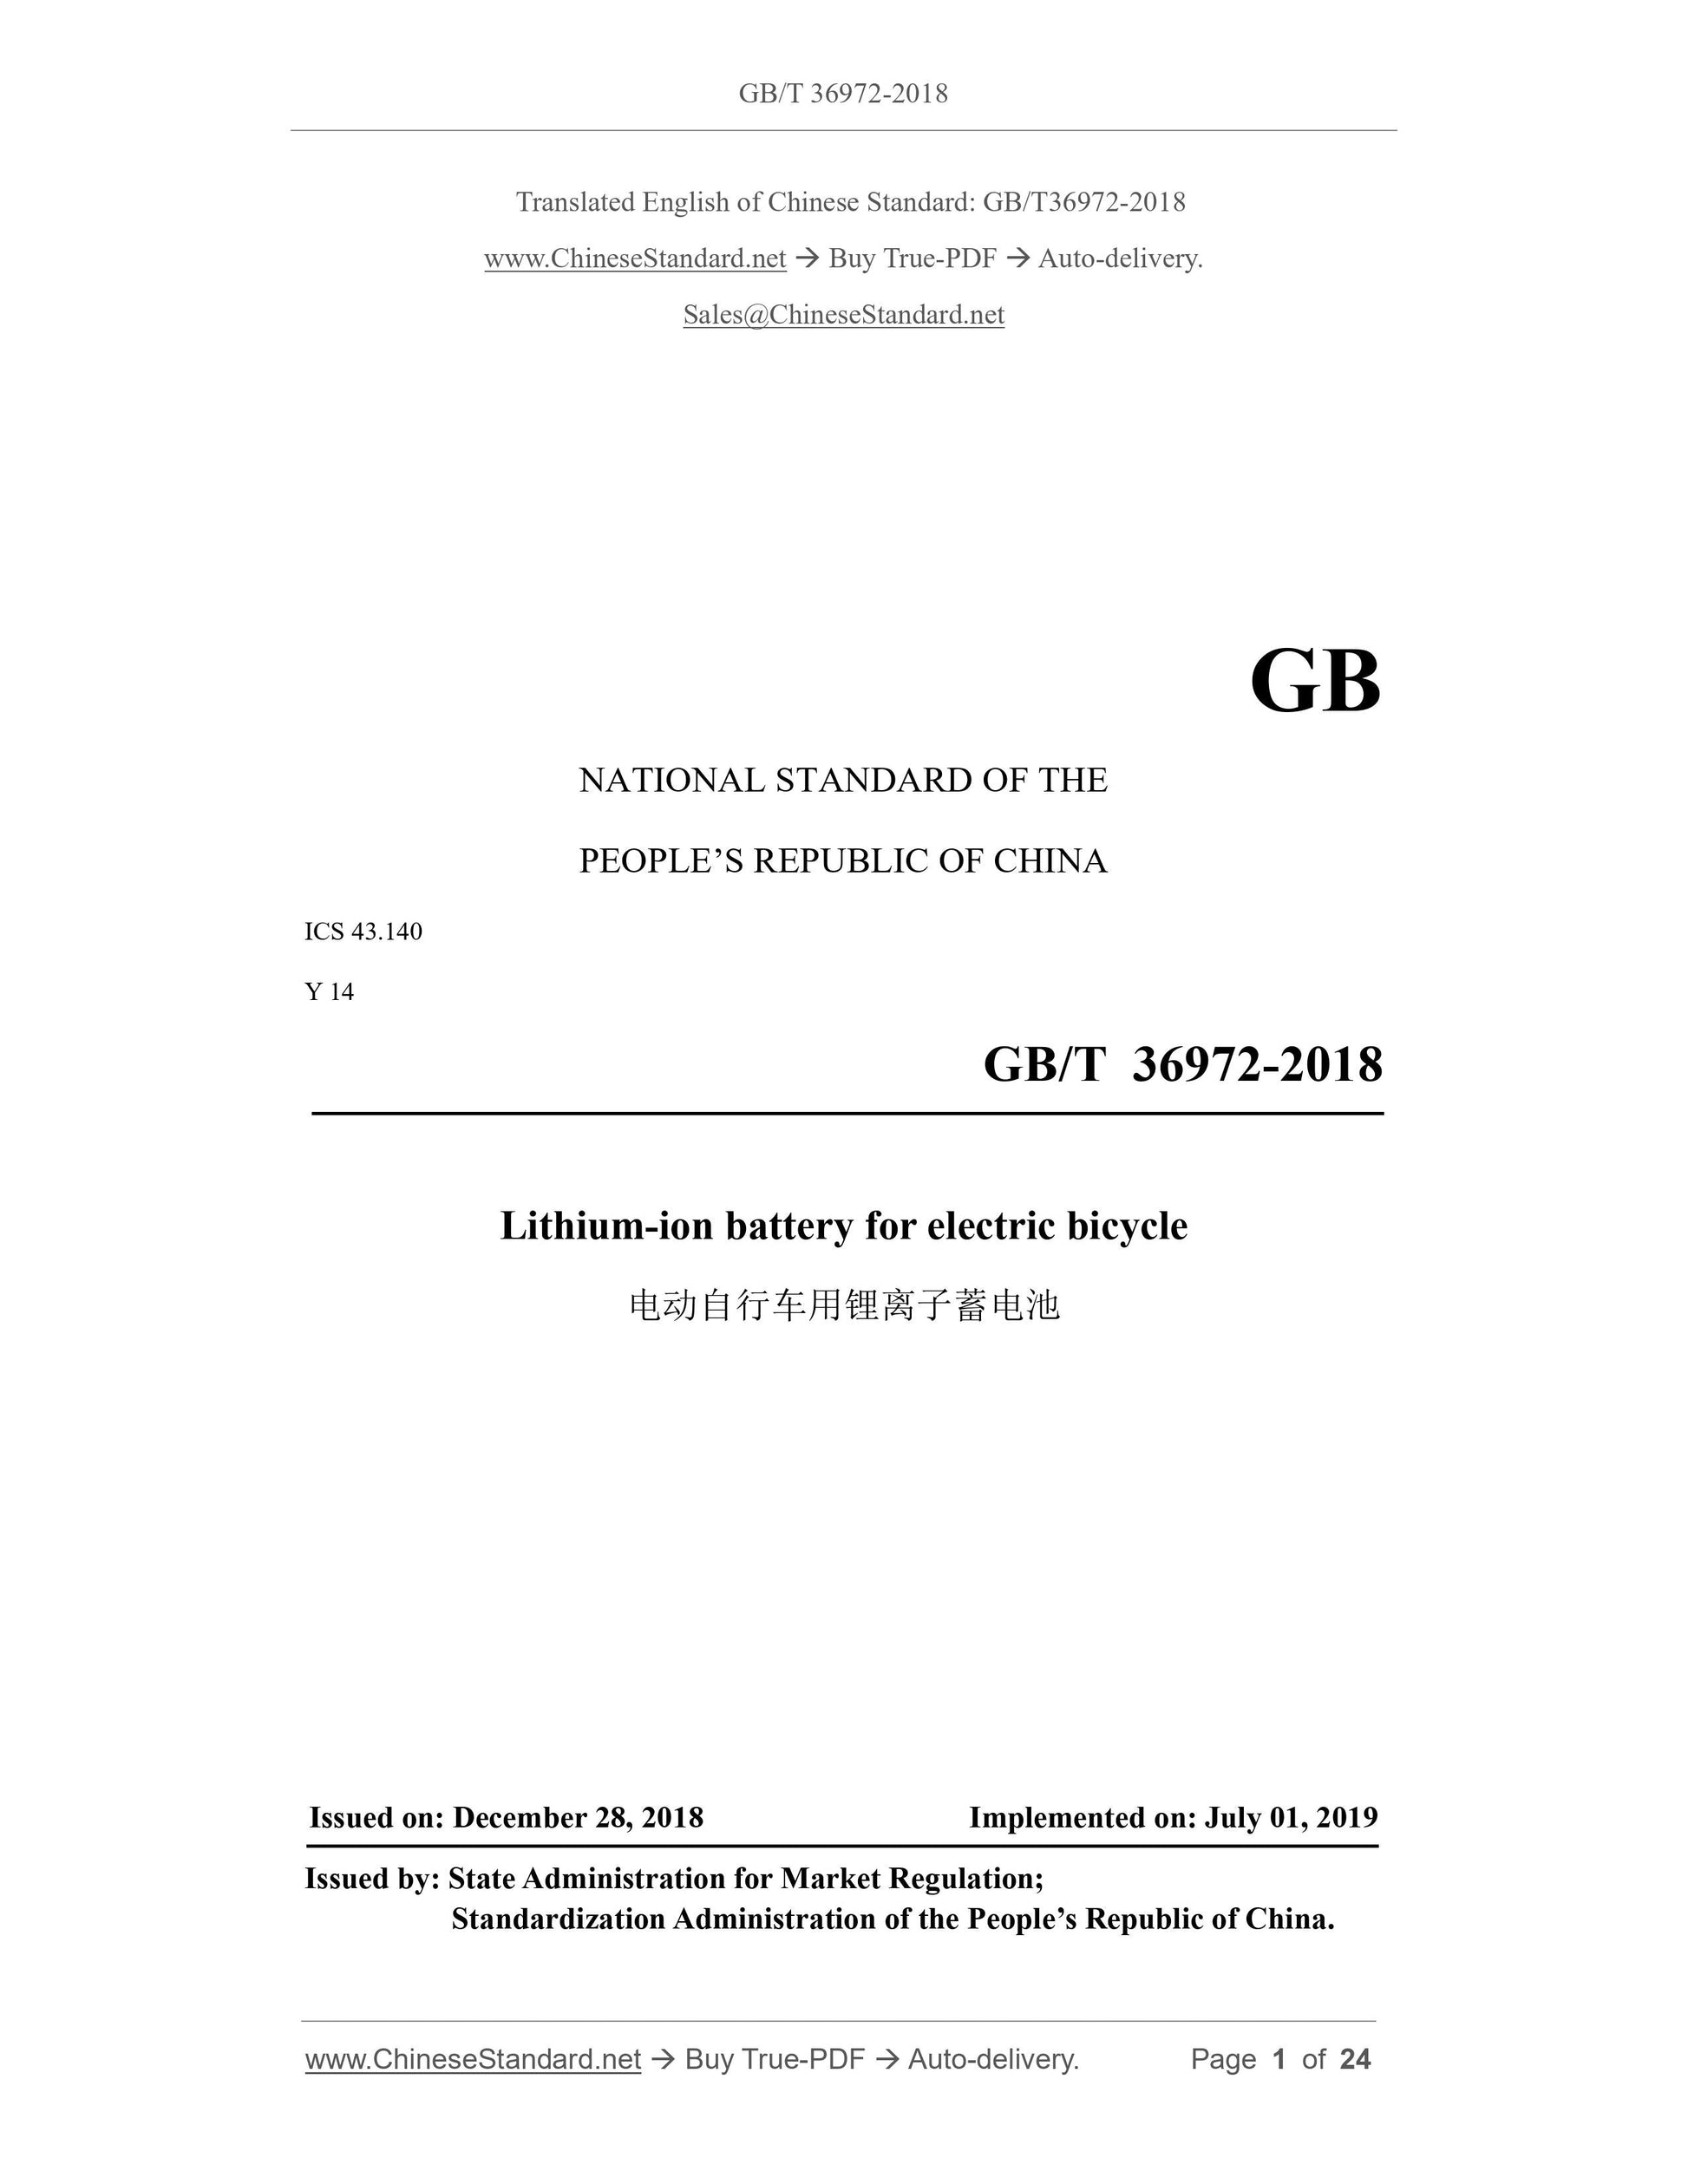 GB/T 36972-2018 Page 1